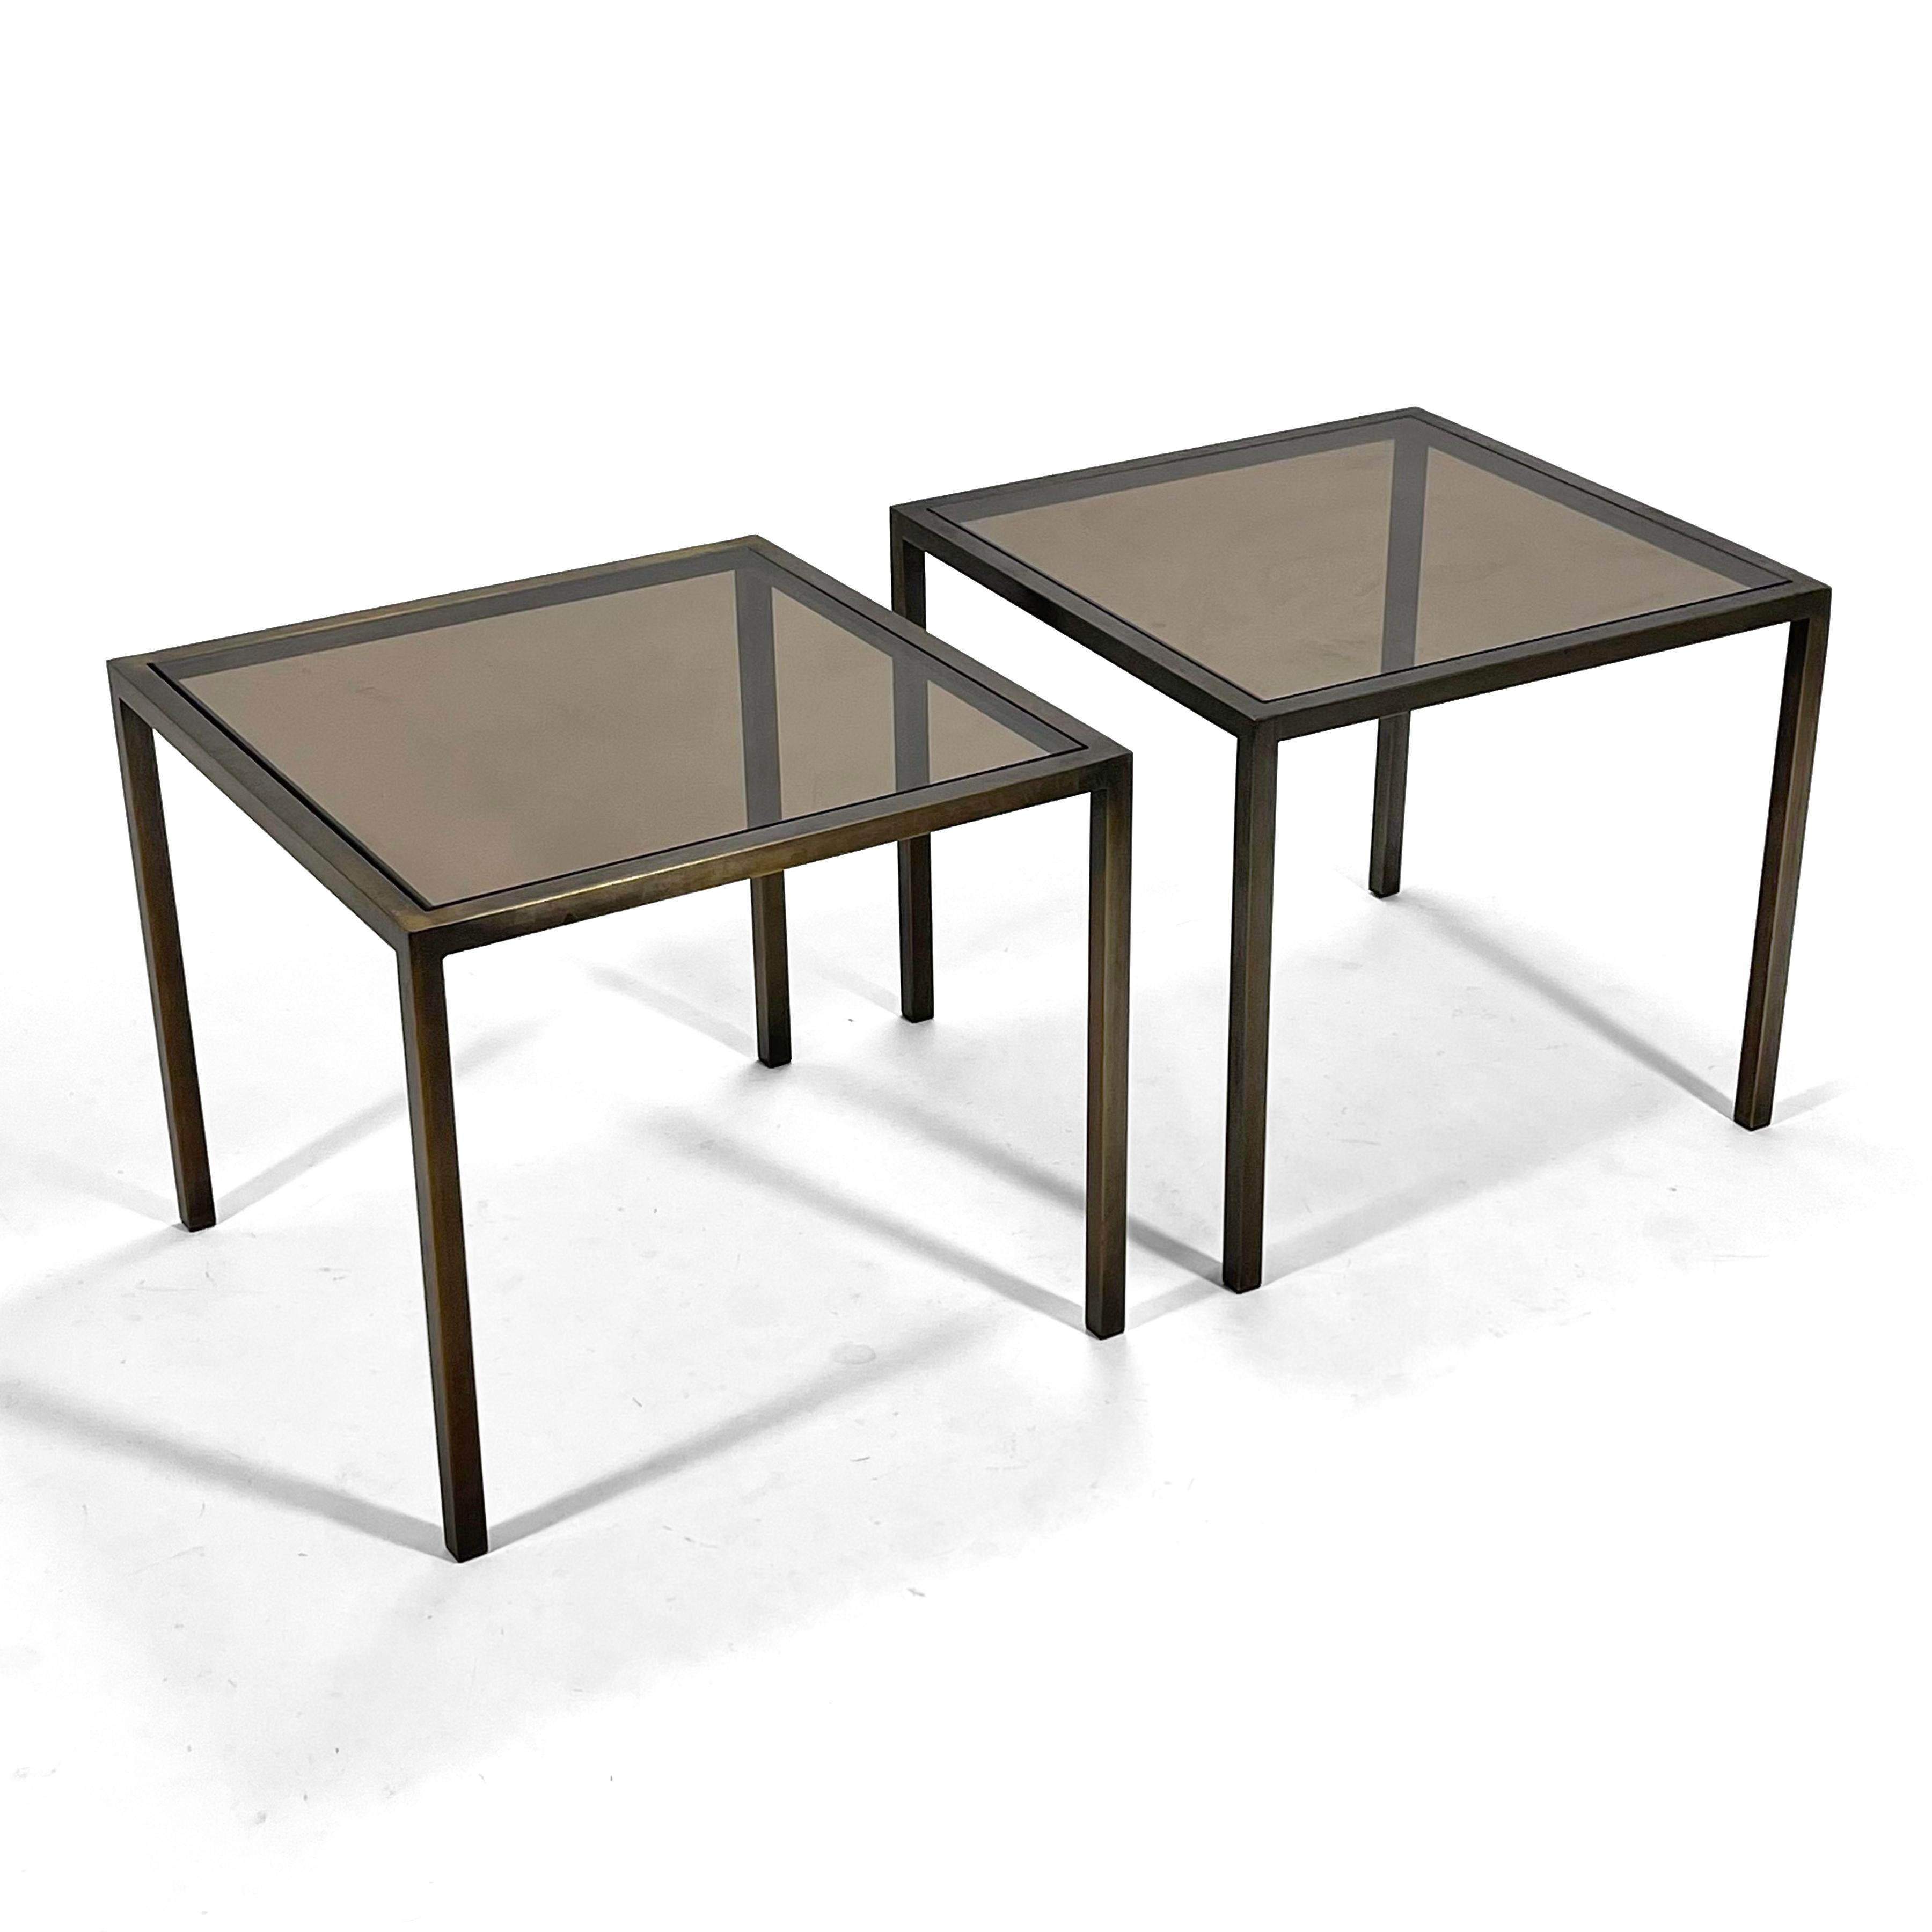 These striking end tables have a beautiful, subtle, minimalist design with bronze plated frames and inset bronze glass tops. The design has similarities to Florence Knoll's work. Possibly custom fabricated, they came from the corporate offices of